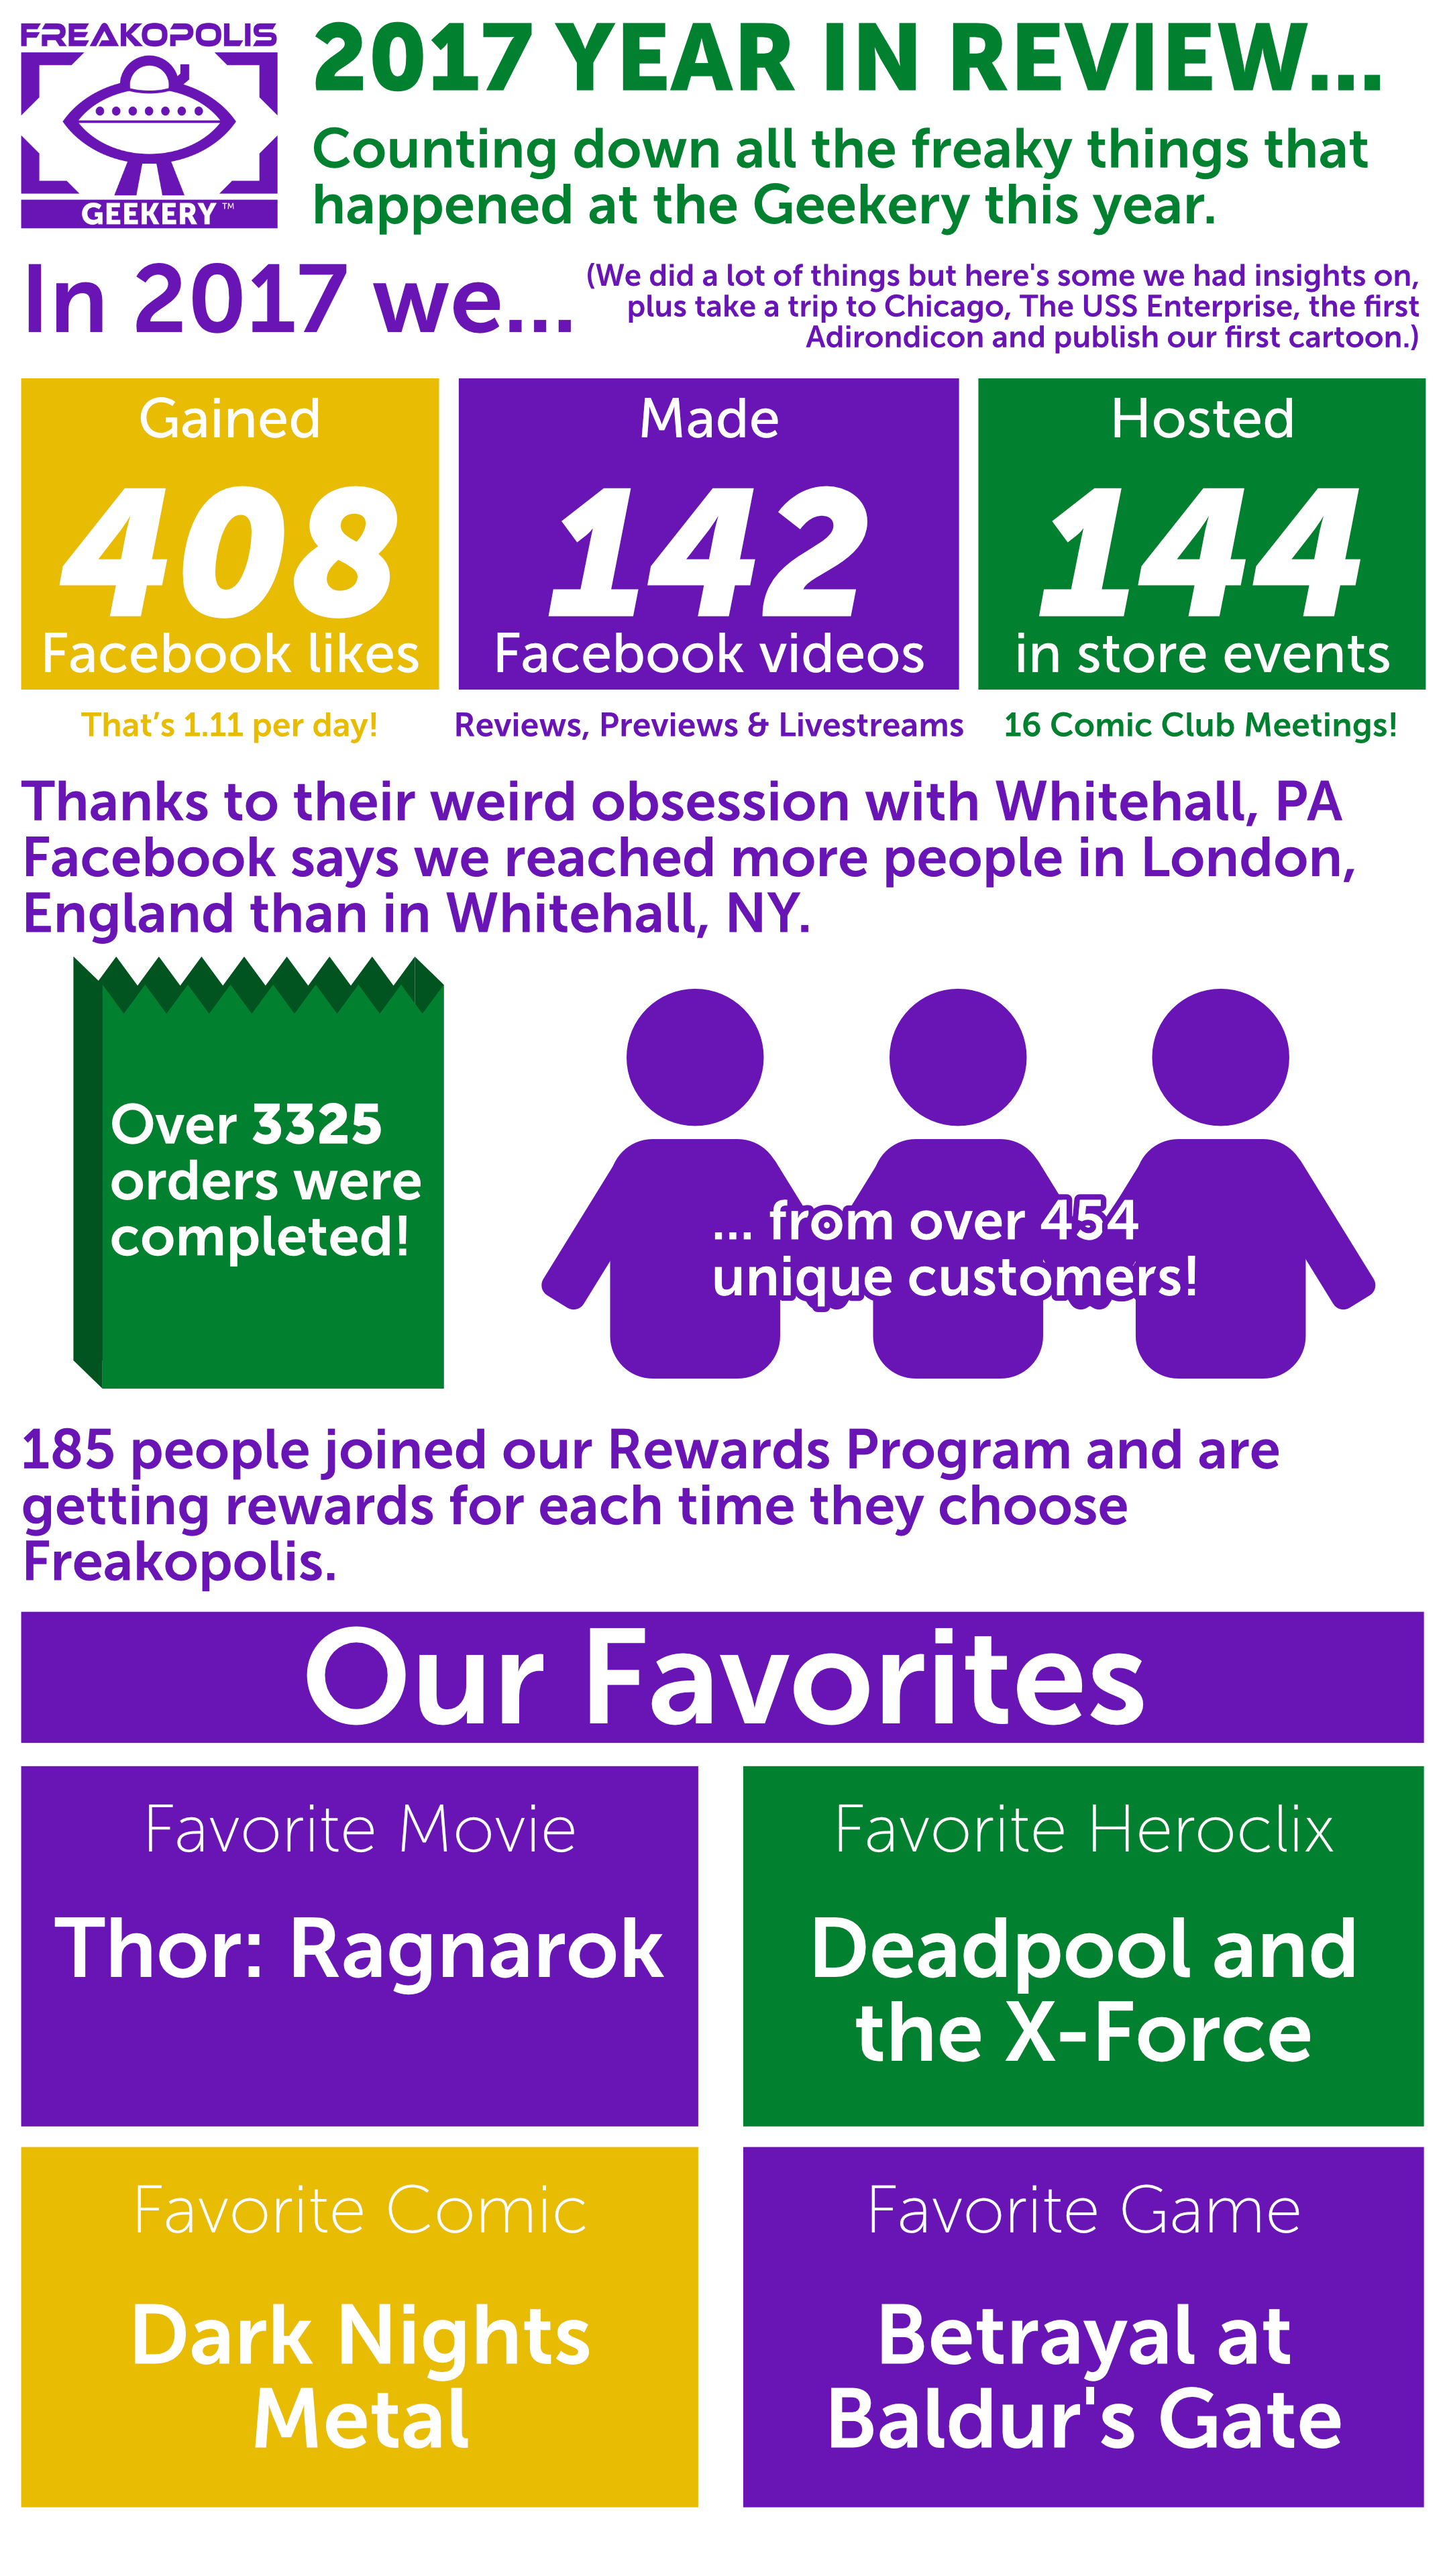 Freakopolis' 2017 Year In Review Infographic